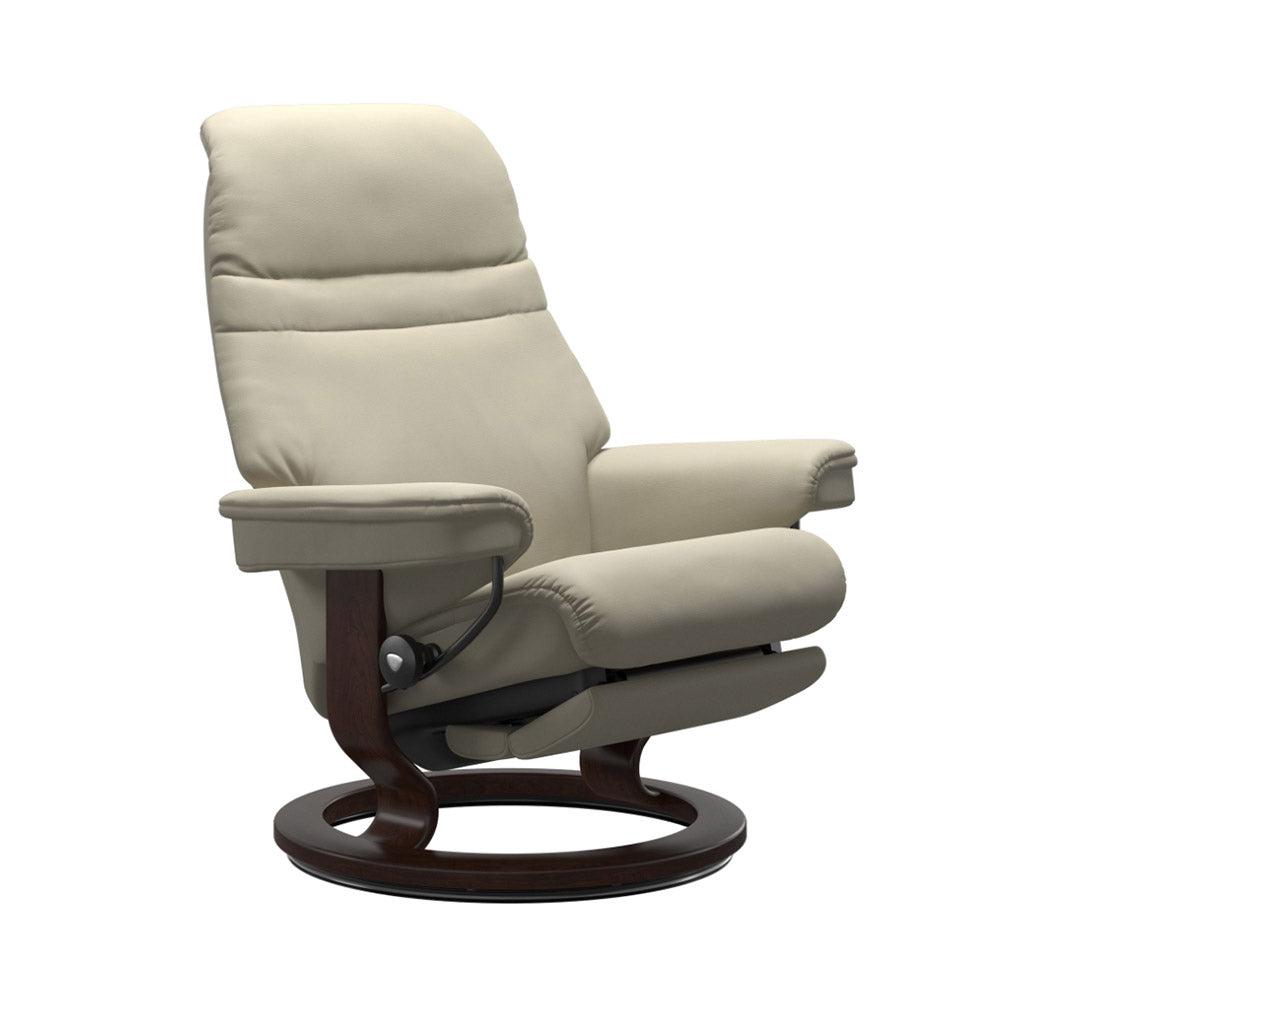 Stressless Computer Table (Classic Chair ONLY) from $595.00 by Stressless